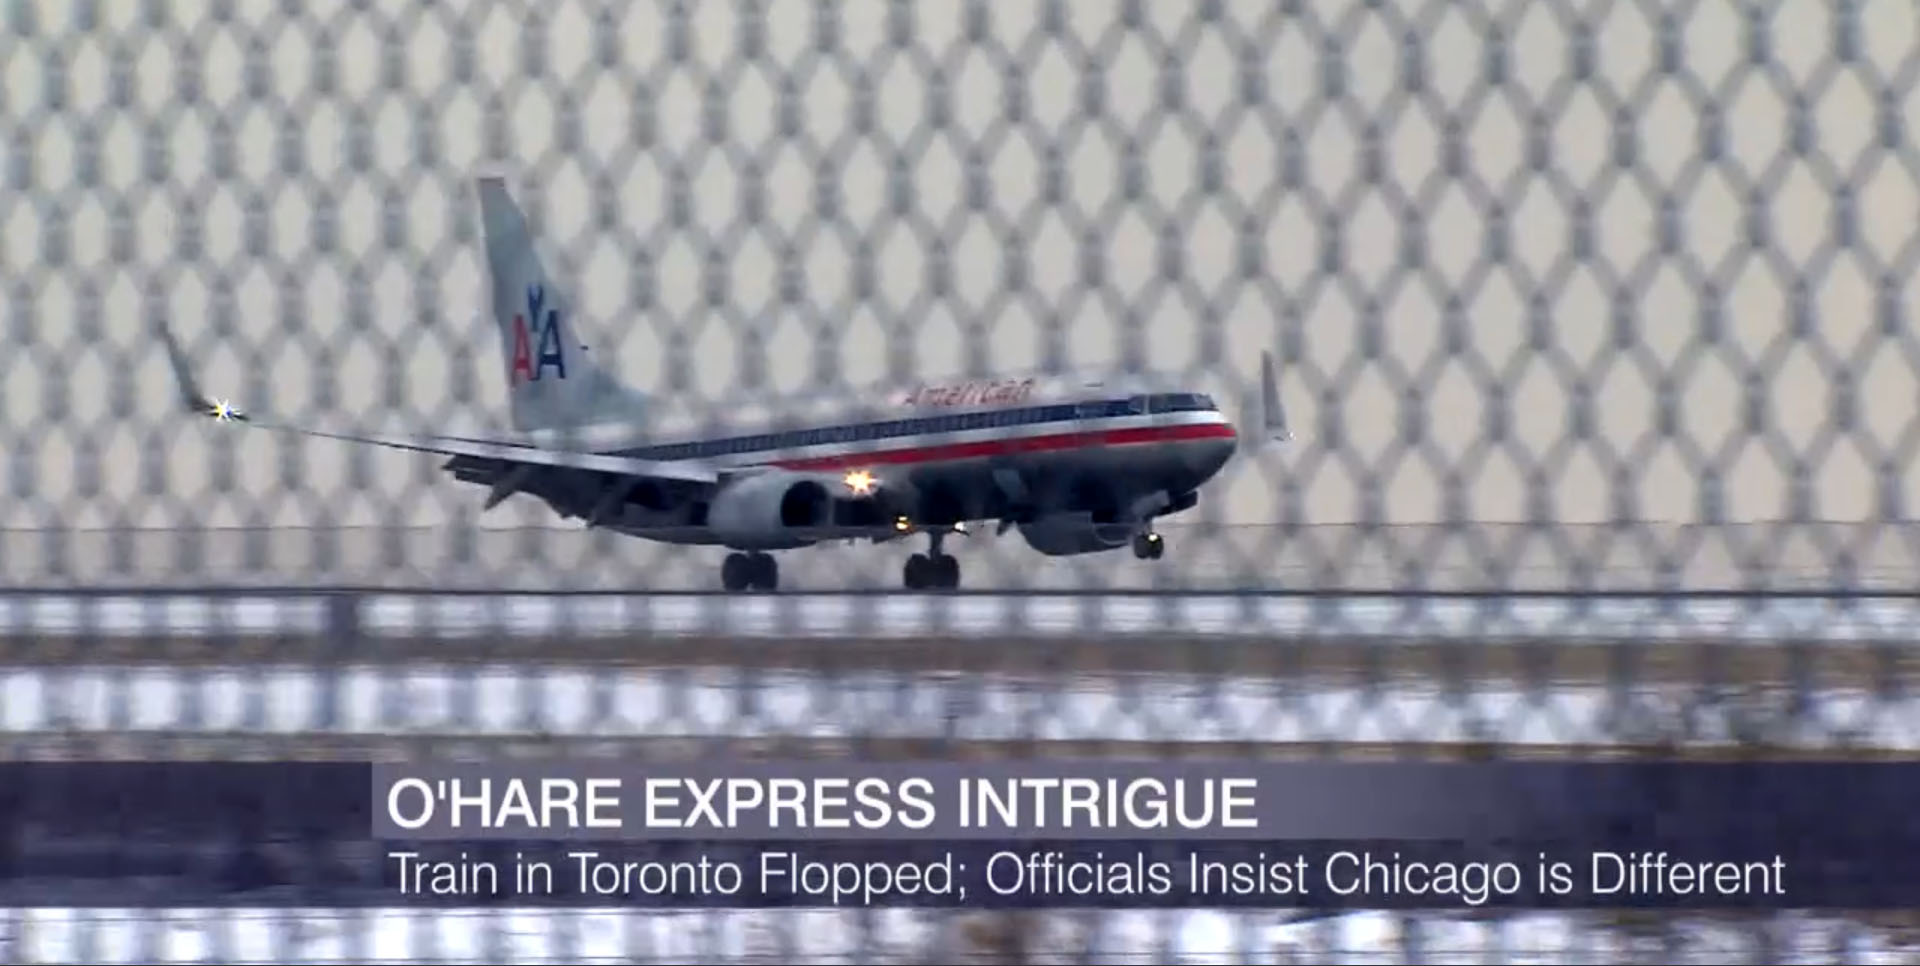 Plane takes off at O'Hare with caption O'Hare Express Intrigue
                  